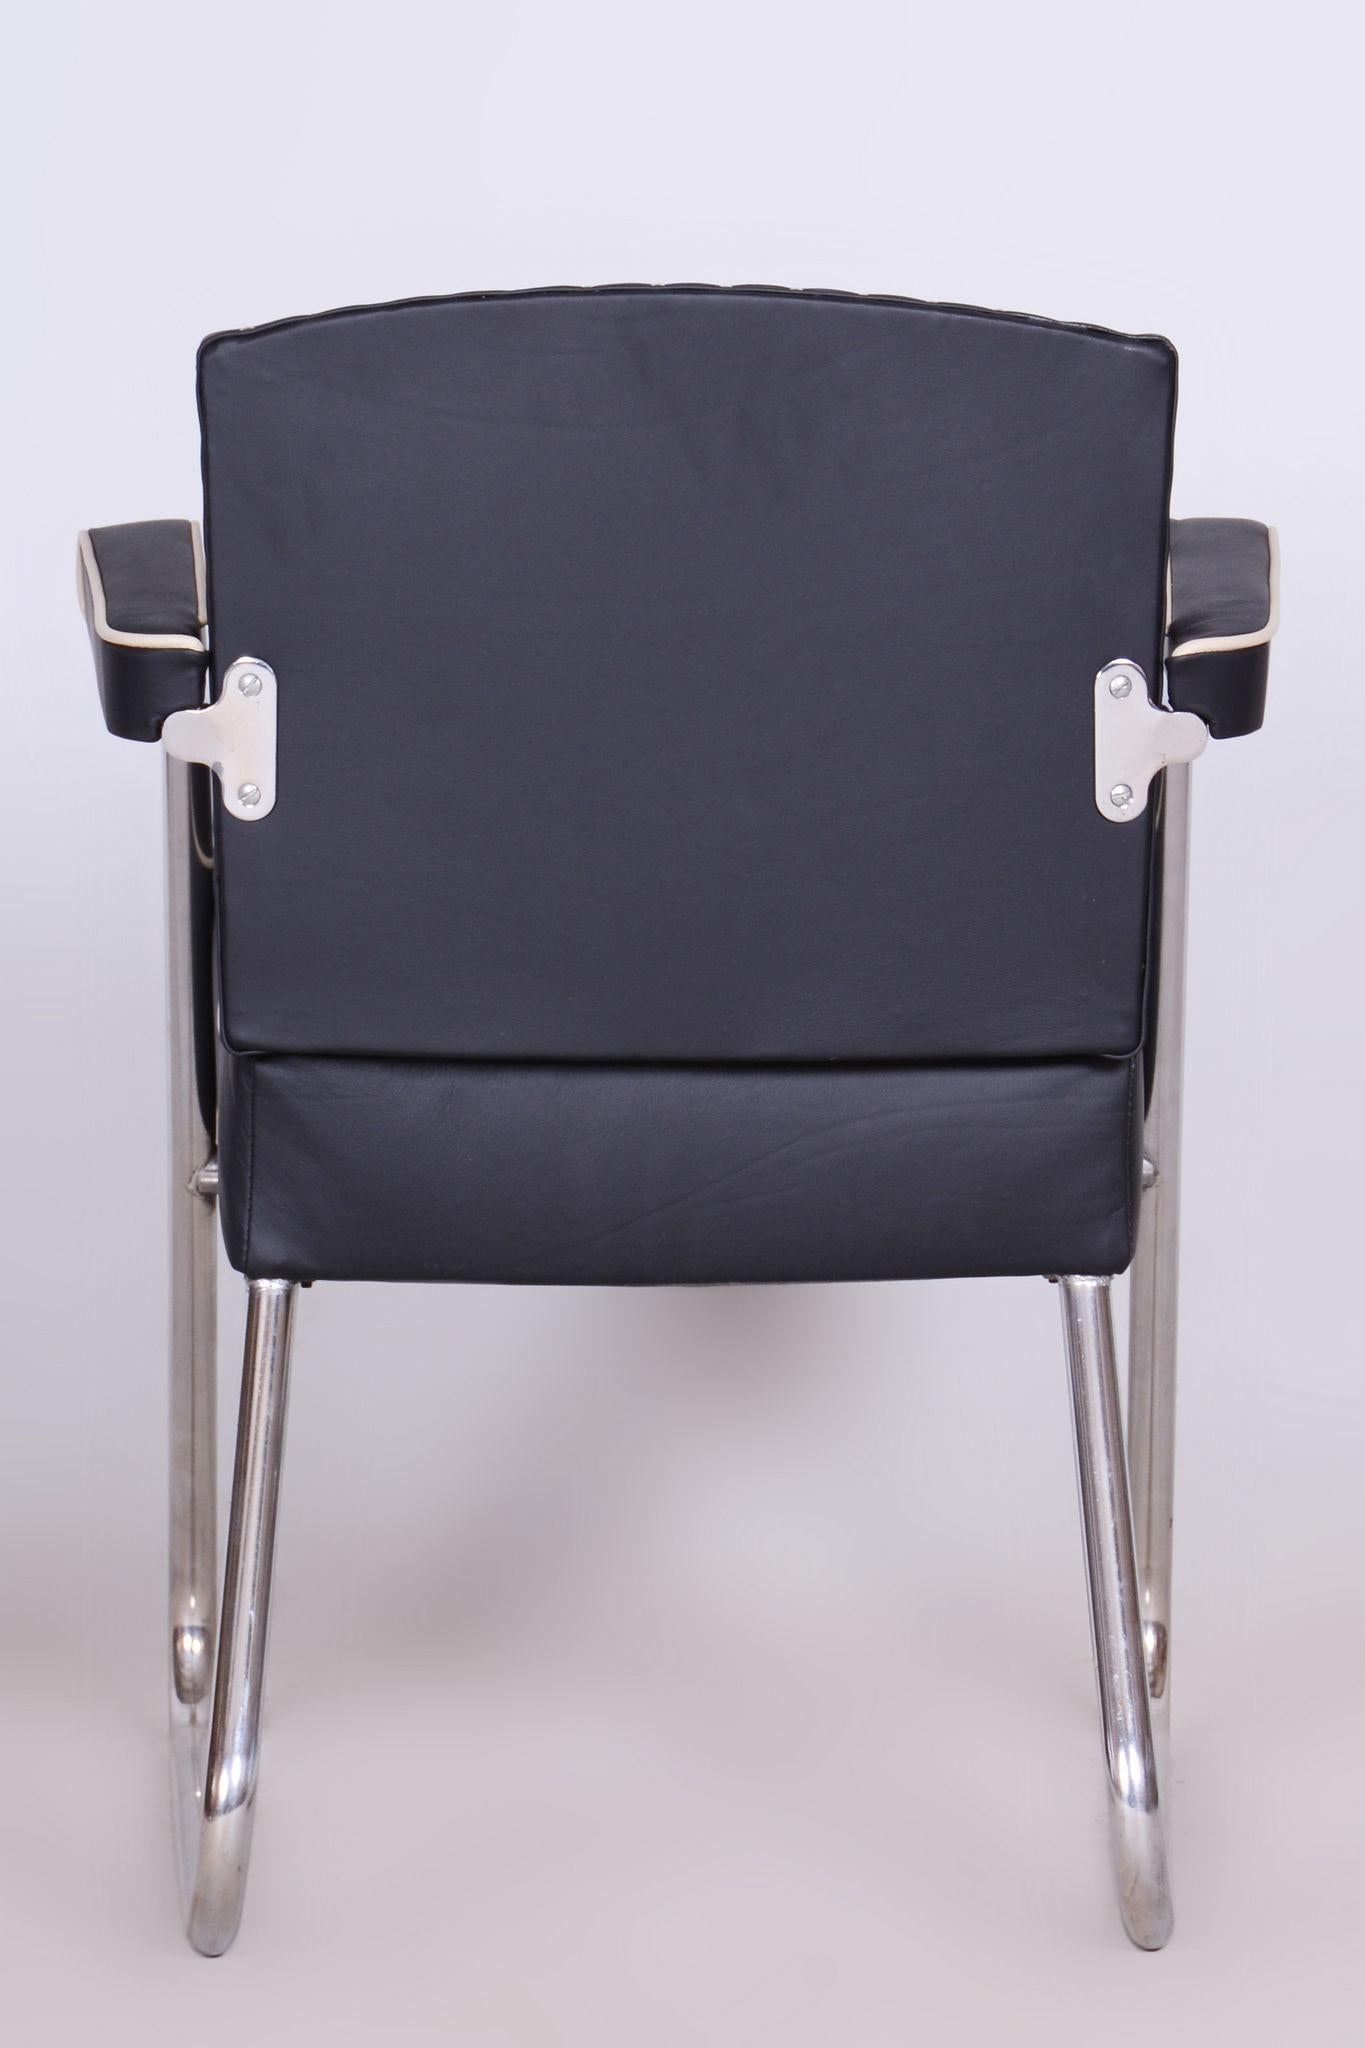 Restored Black Bauhaus Armchair.

Maker: Mauser
Designer: Gilbert Rohde
Material: HIgh-Quality Leather, Chrome-Plated Steel
Source: Germany
Period: 1930-1939
Newly reupholstered in high quality.
The chrome parts have been cleaned and professionally